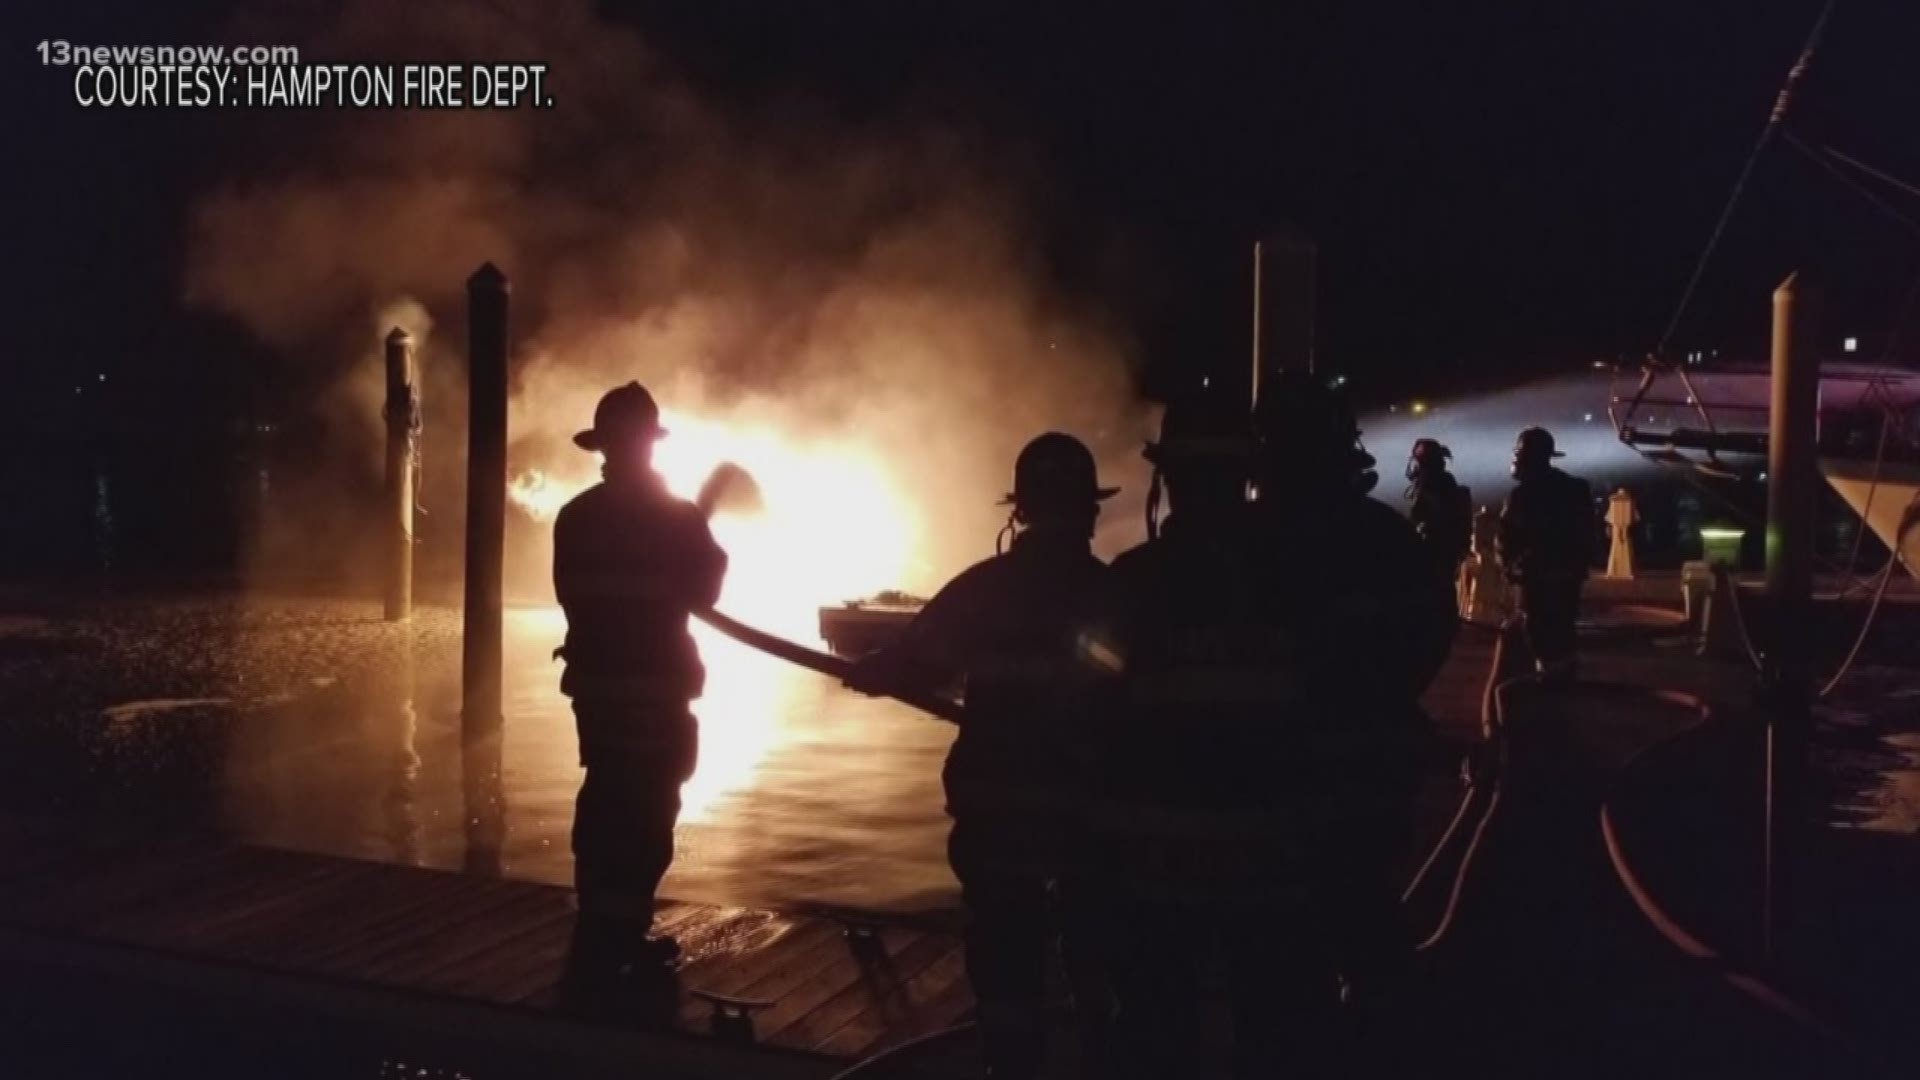 A boat docked at a Hampton marina caught fire early Monday morning and sank to the bottom.